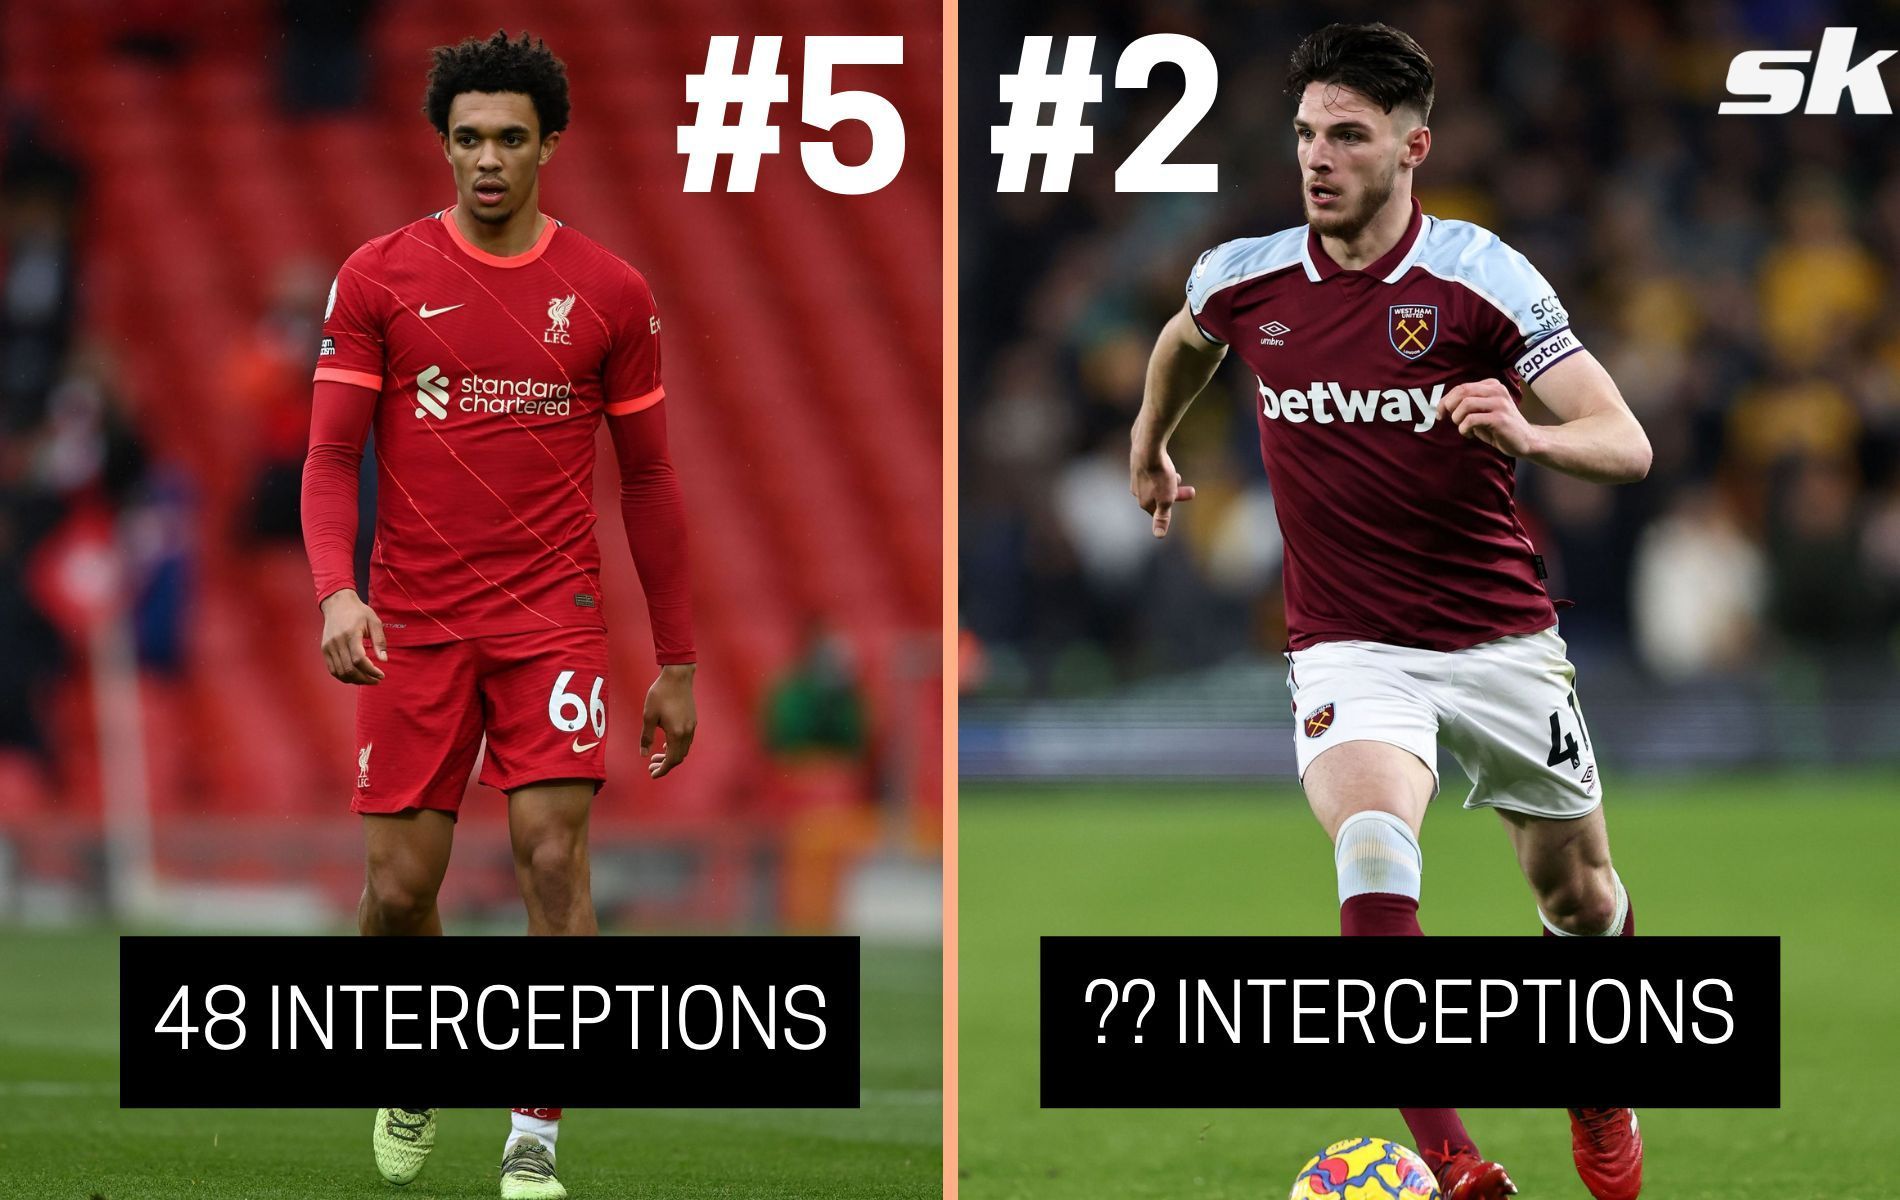 The Premier League has seen a number of interceptions this season